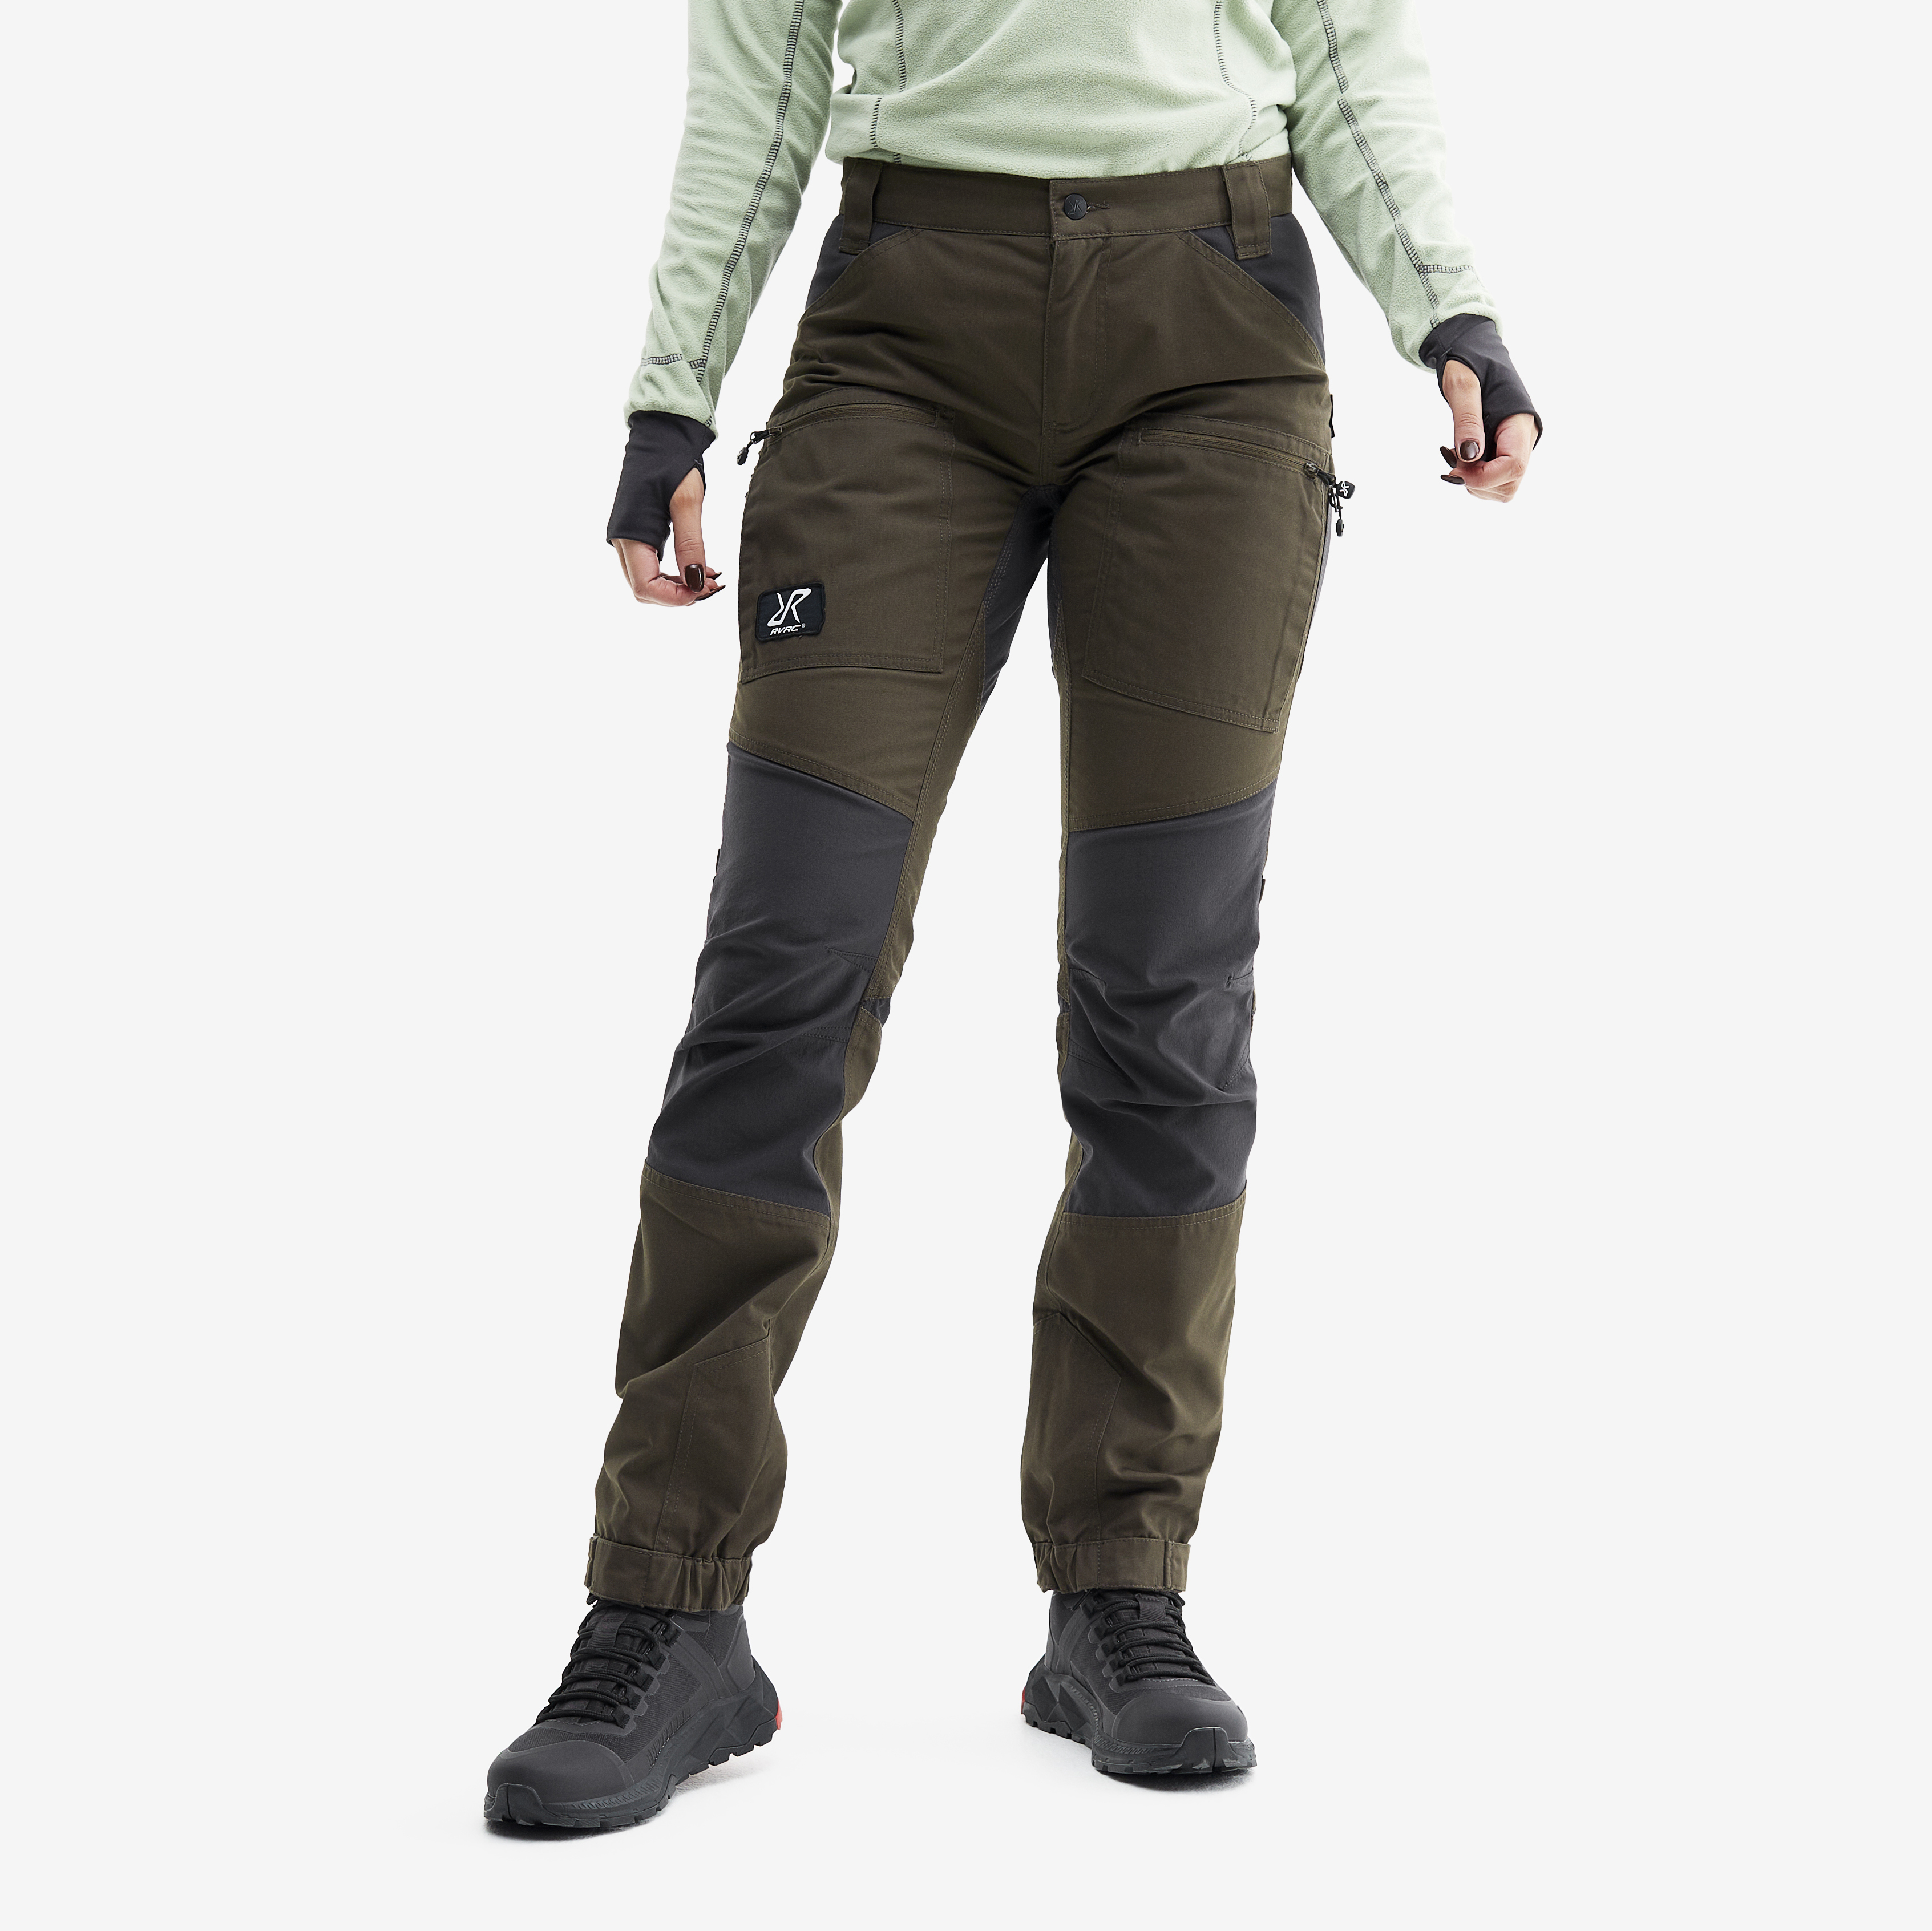 Nordwand Pro hiking pants for women in brown